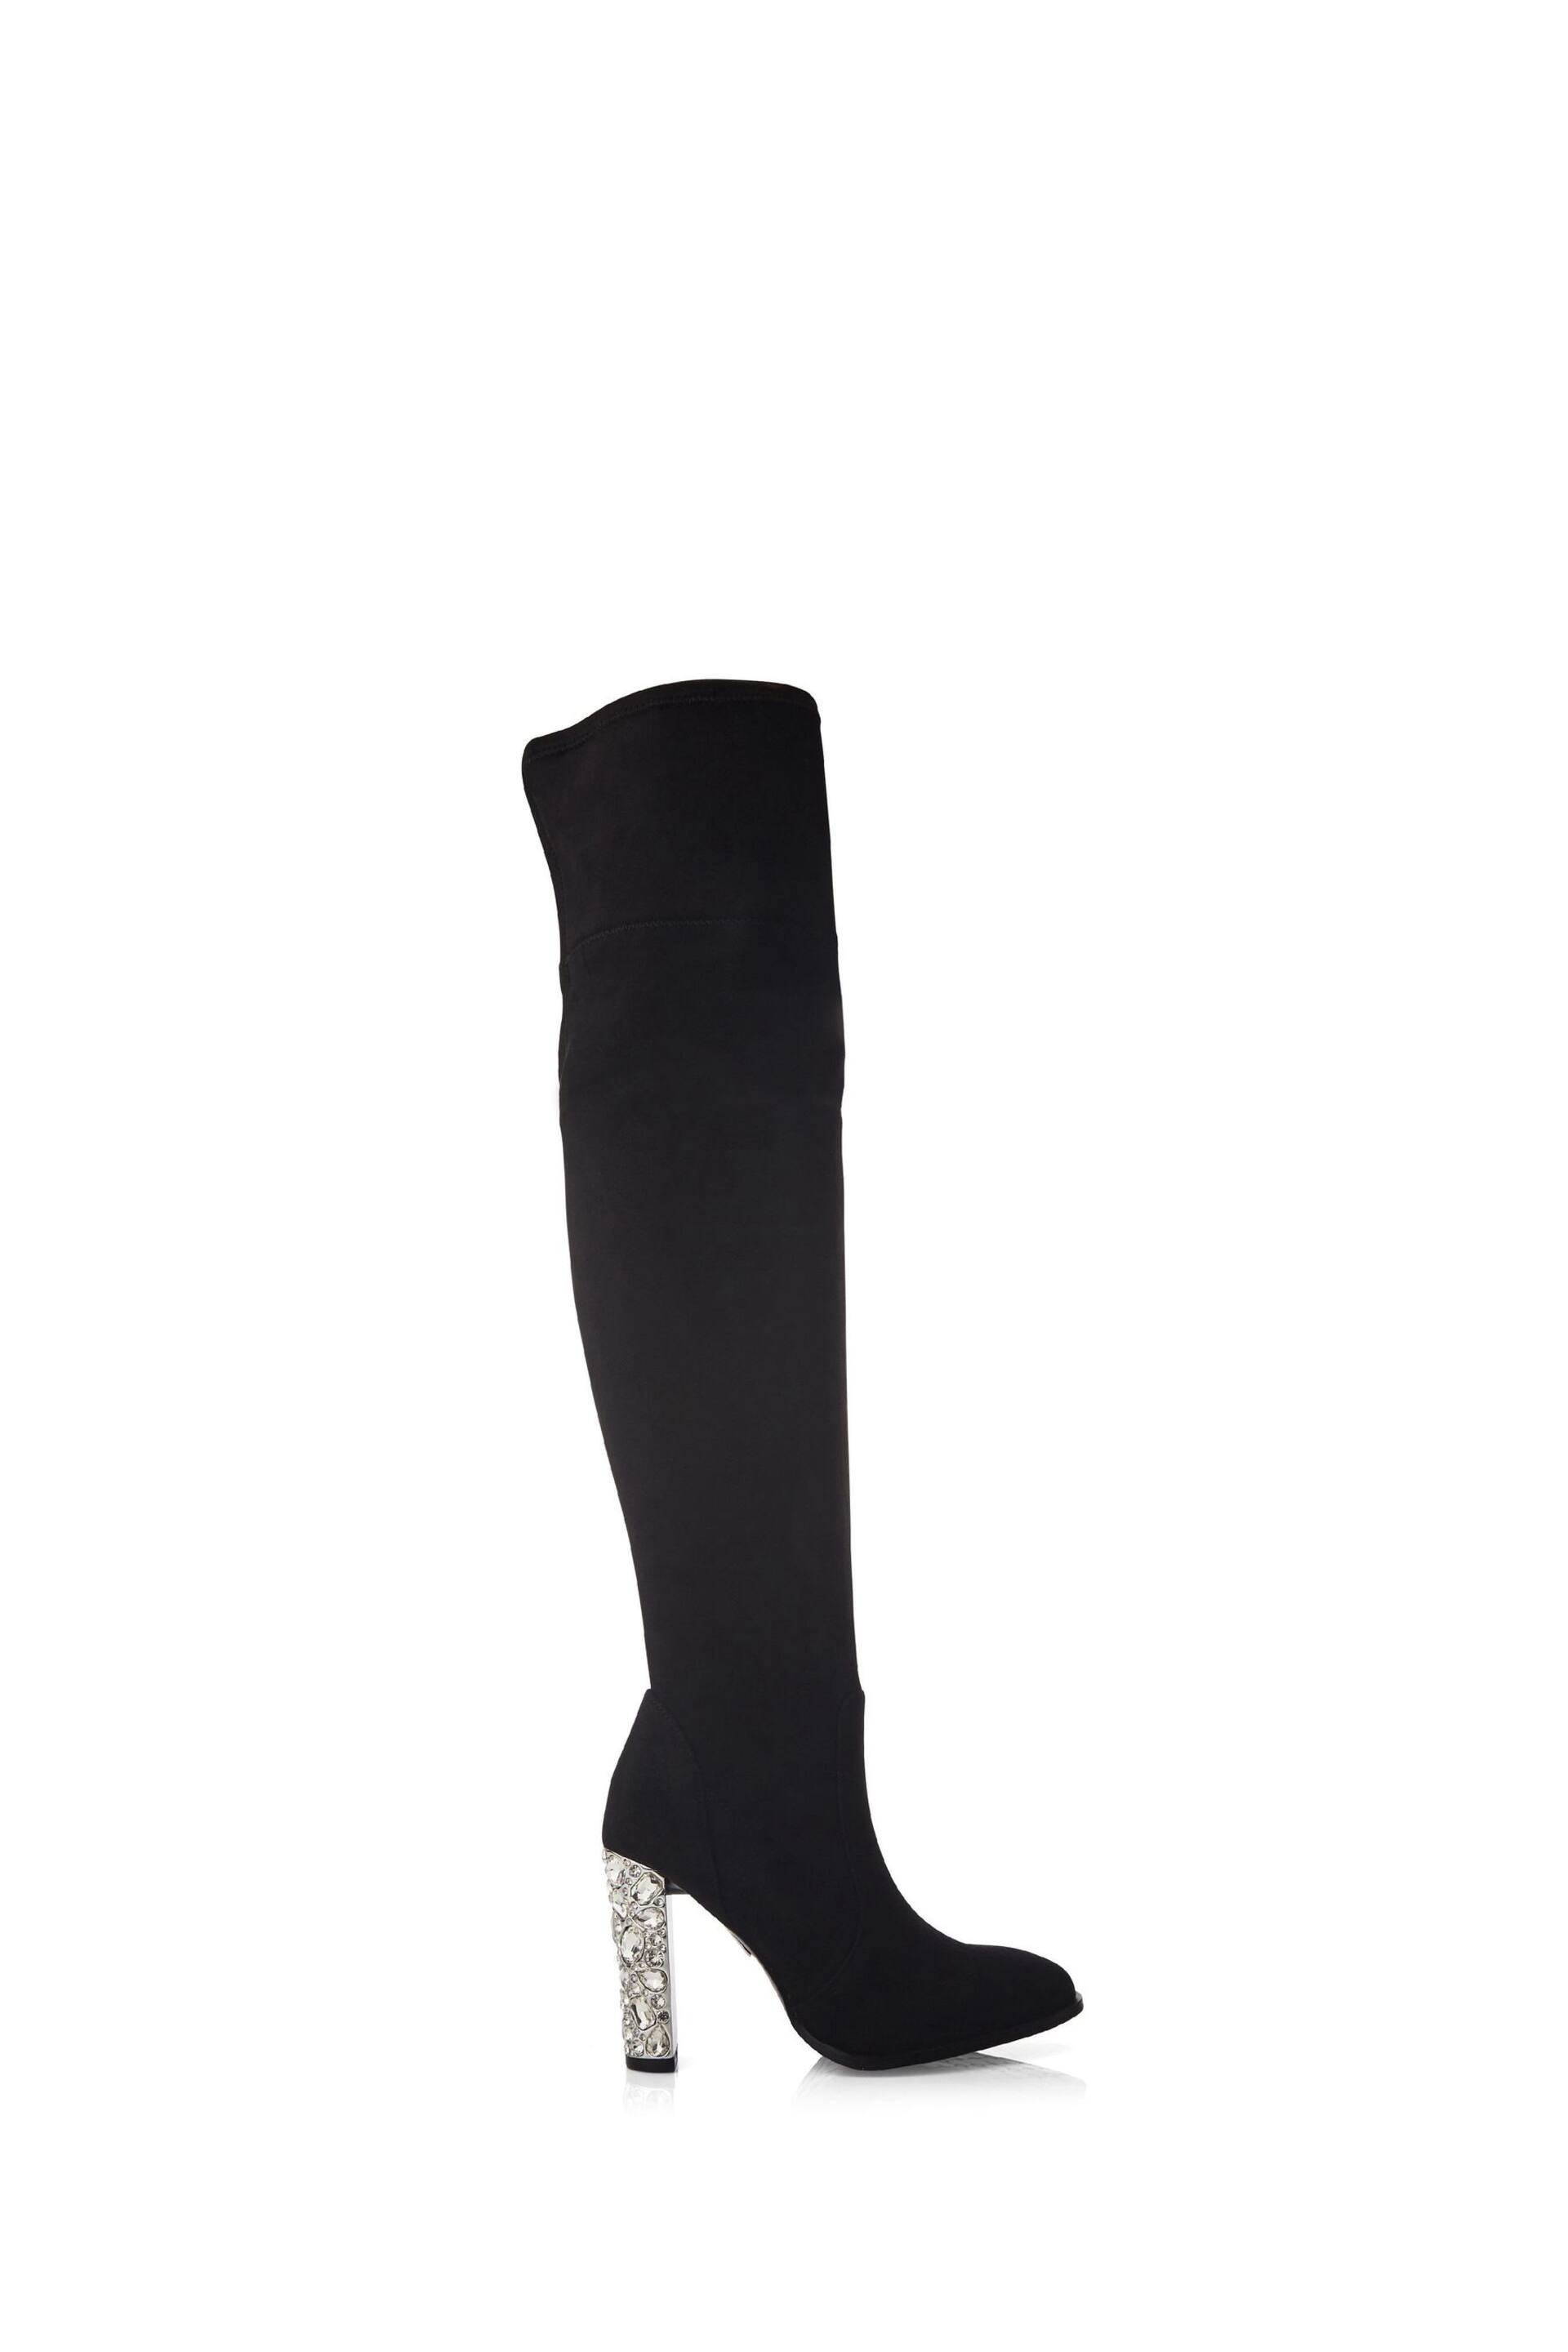 Moda in Pelle Zamaria Over Knee Microsude Black Boots With Feature Heel - Image 1 of 4